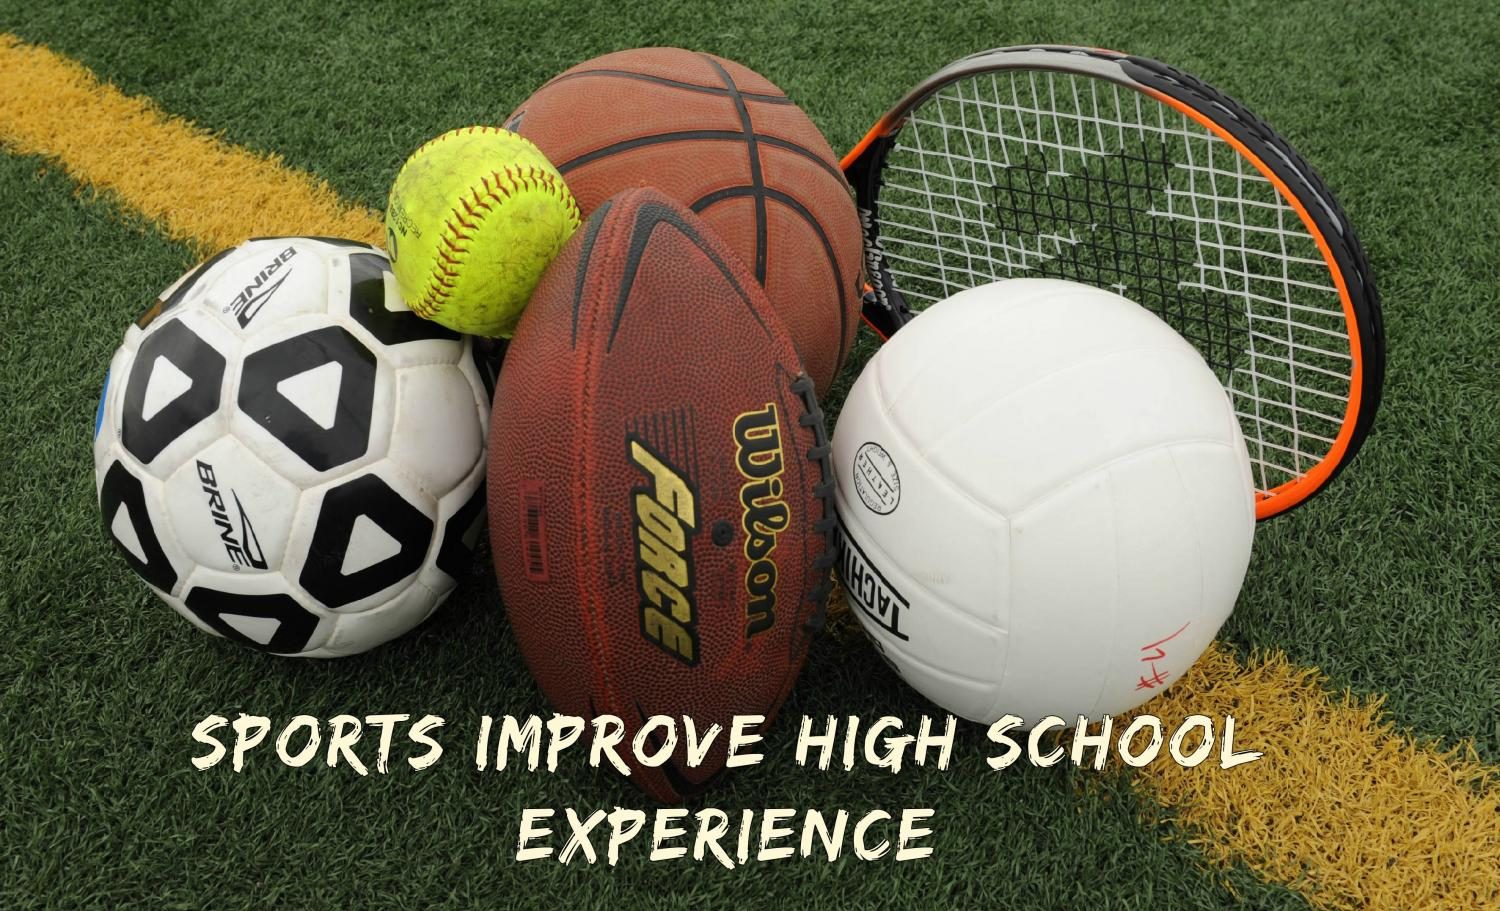 High+school+sports+are+key+to+a+better+school+experience